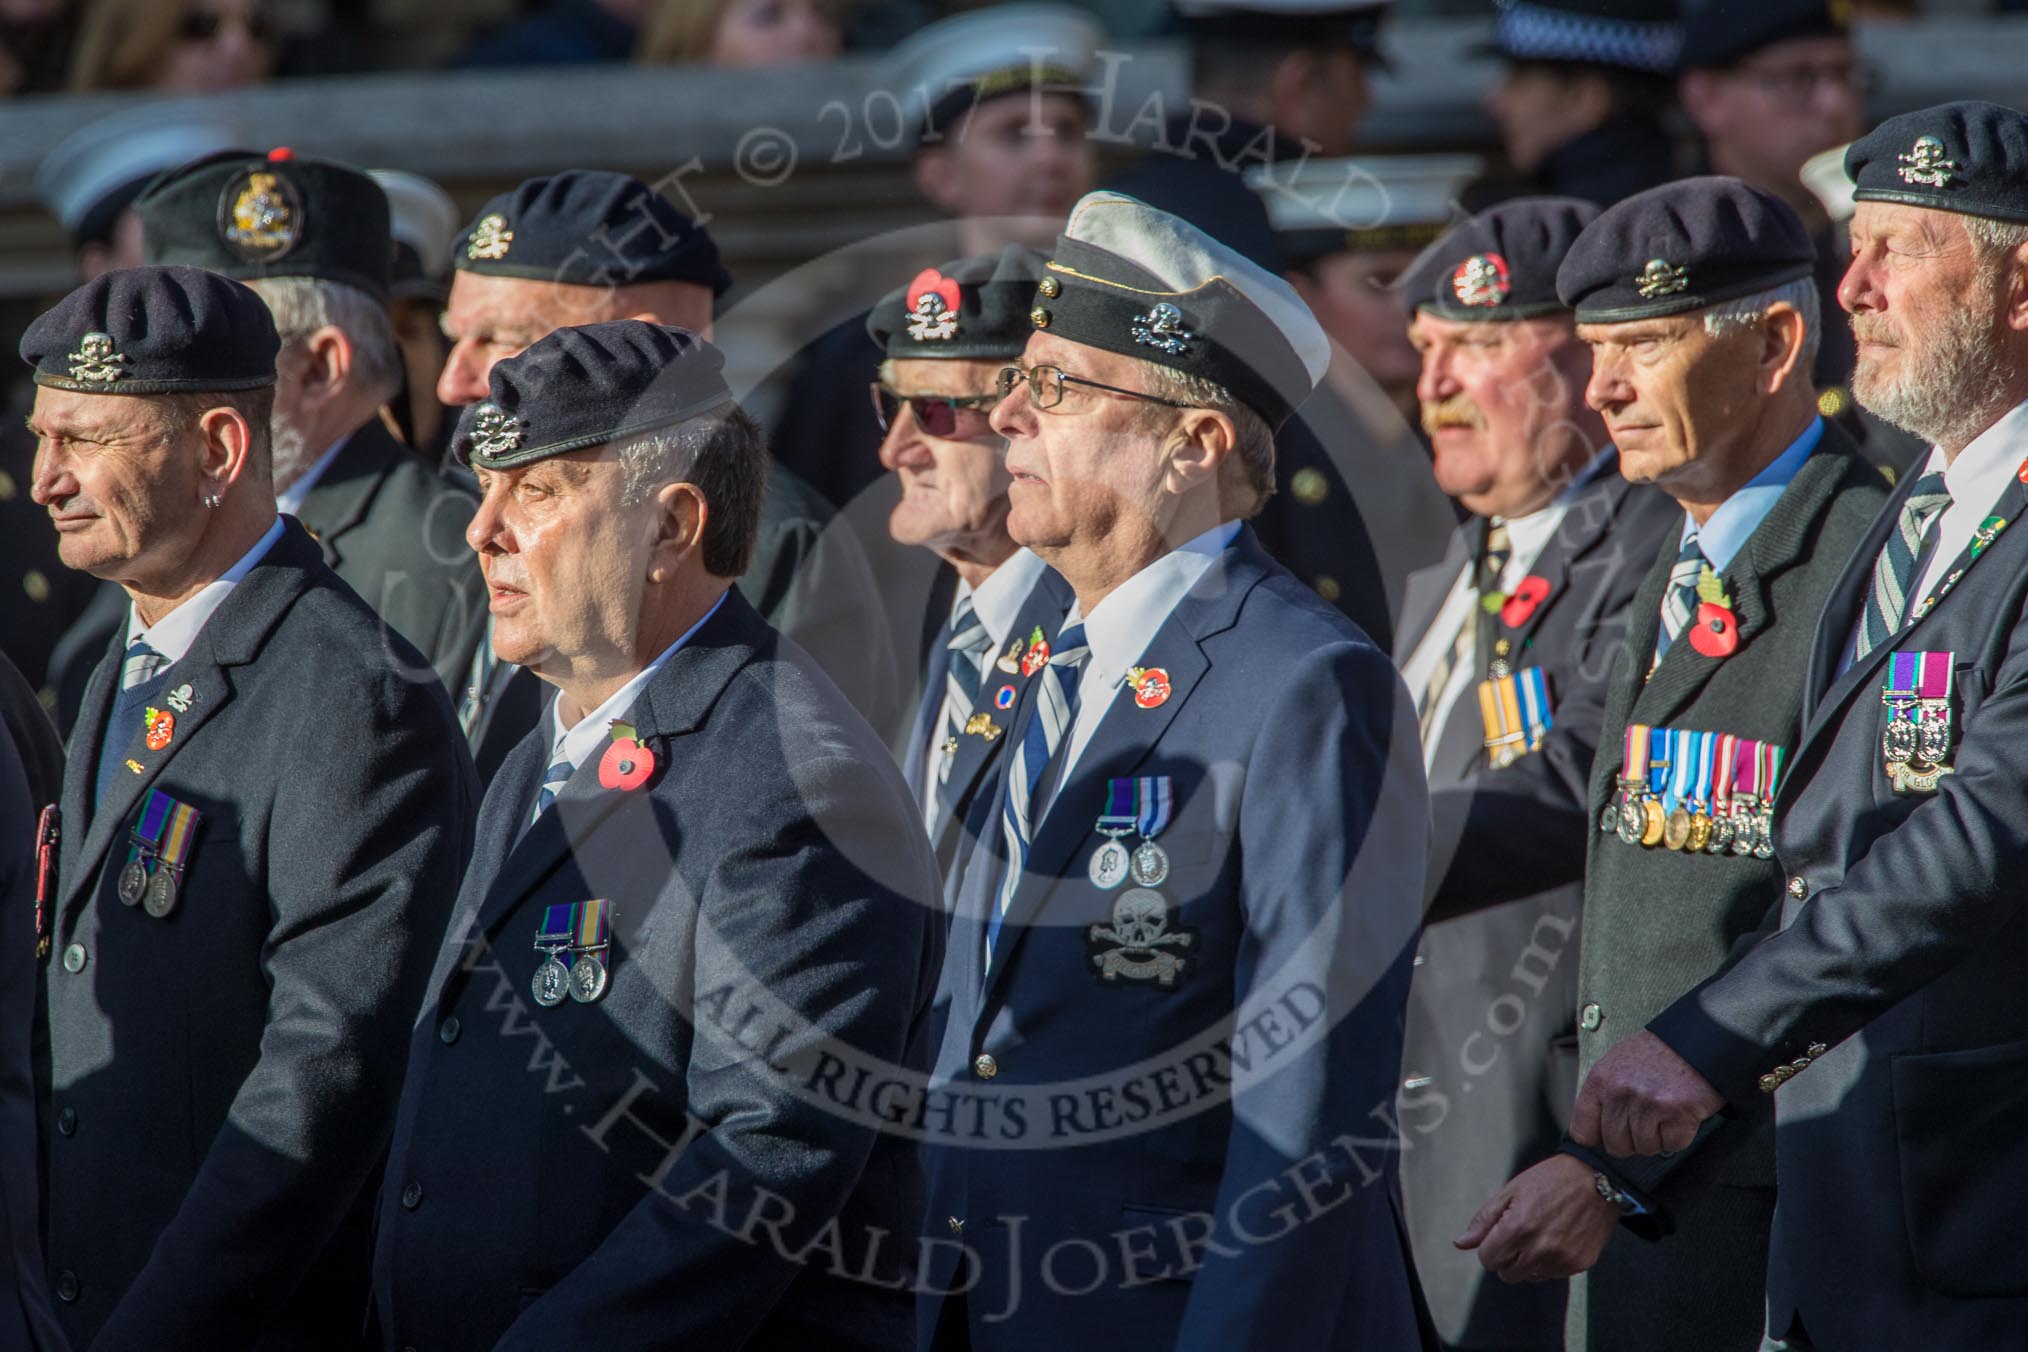 17th/21st Lancers (Death or Glory Boys) Veterans Association (Group B24, 35 members) during the Royal British Legion March Past on Remembrance Sunday at the Cenotaph, Whitehall, Westminster, London, 11 November 2018, 12:11.